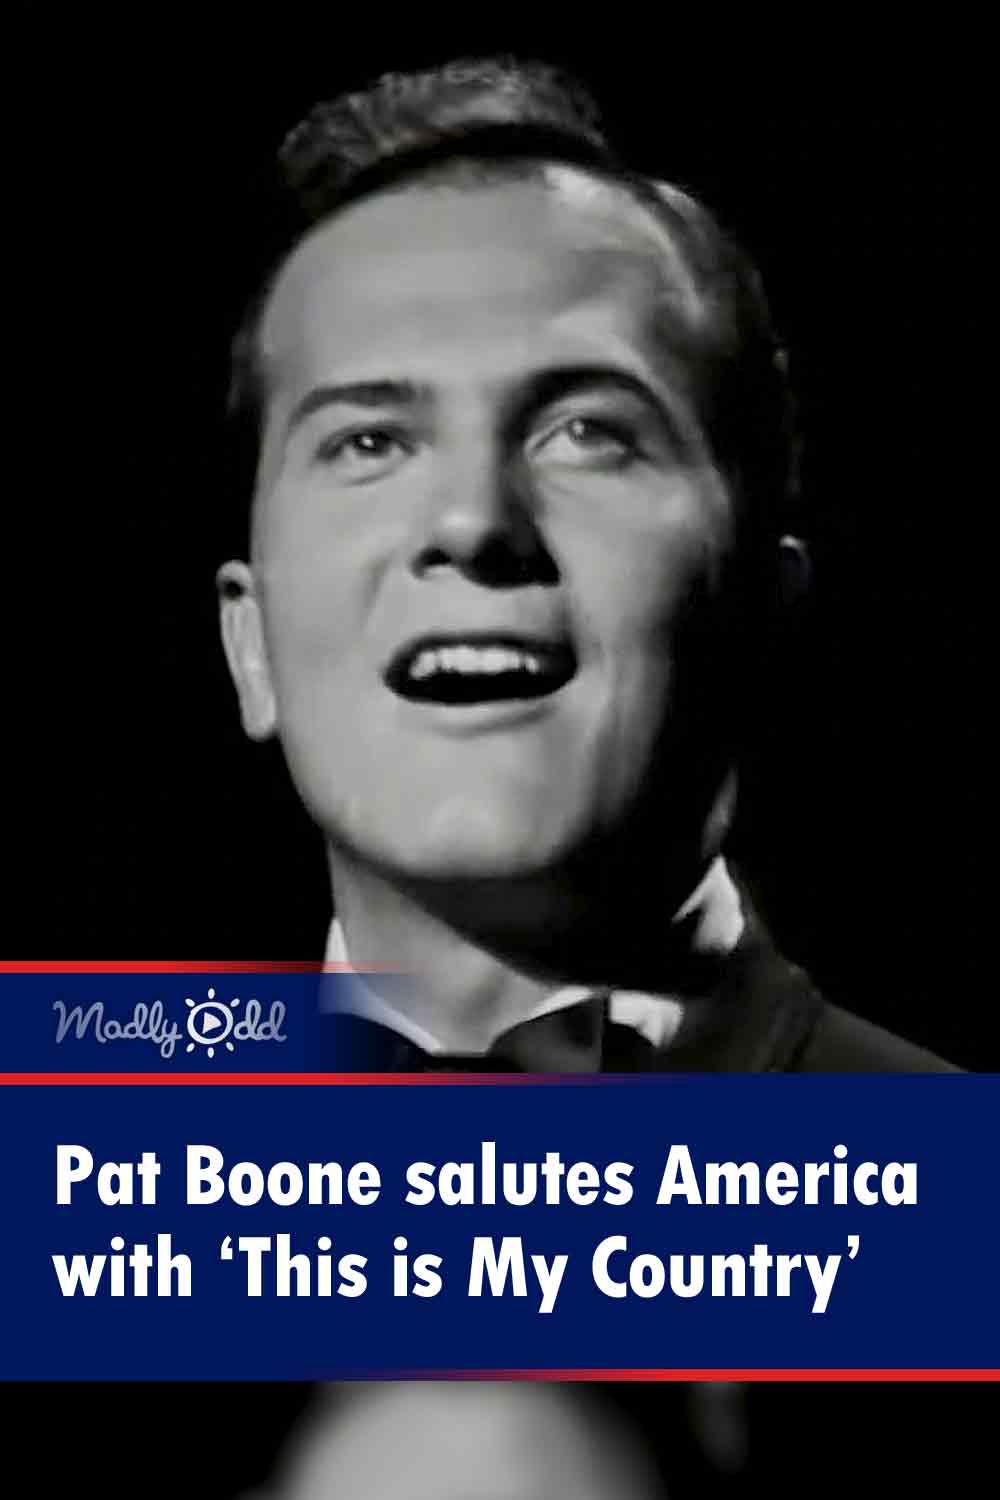 Pat Boone salutes America with ‘This is My Country’